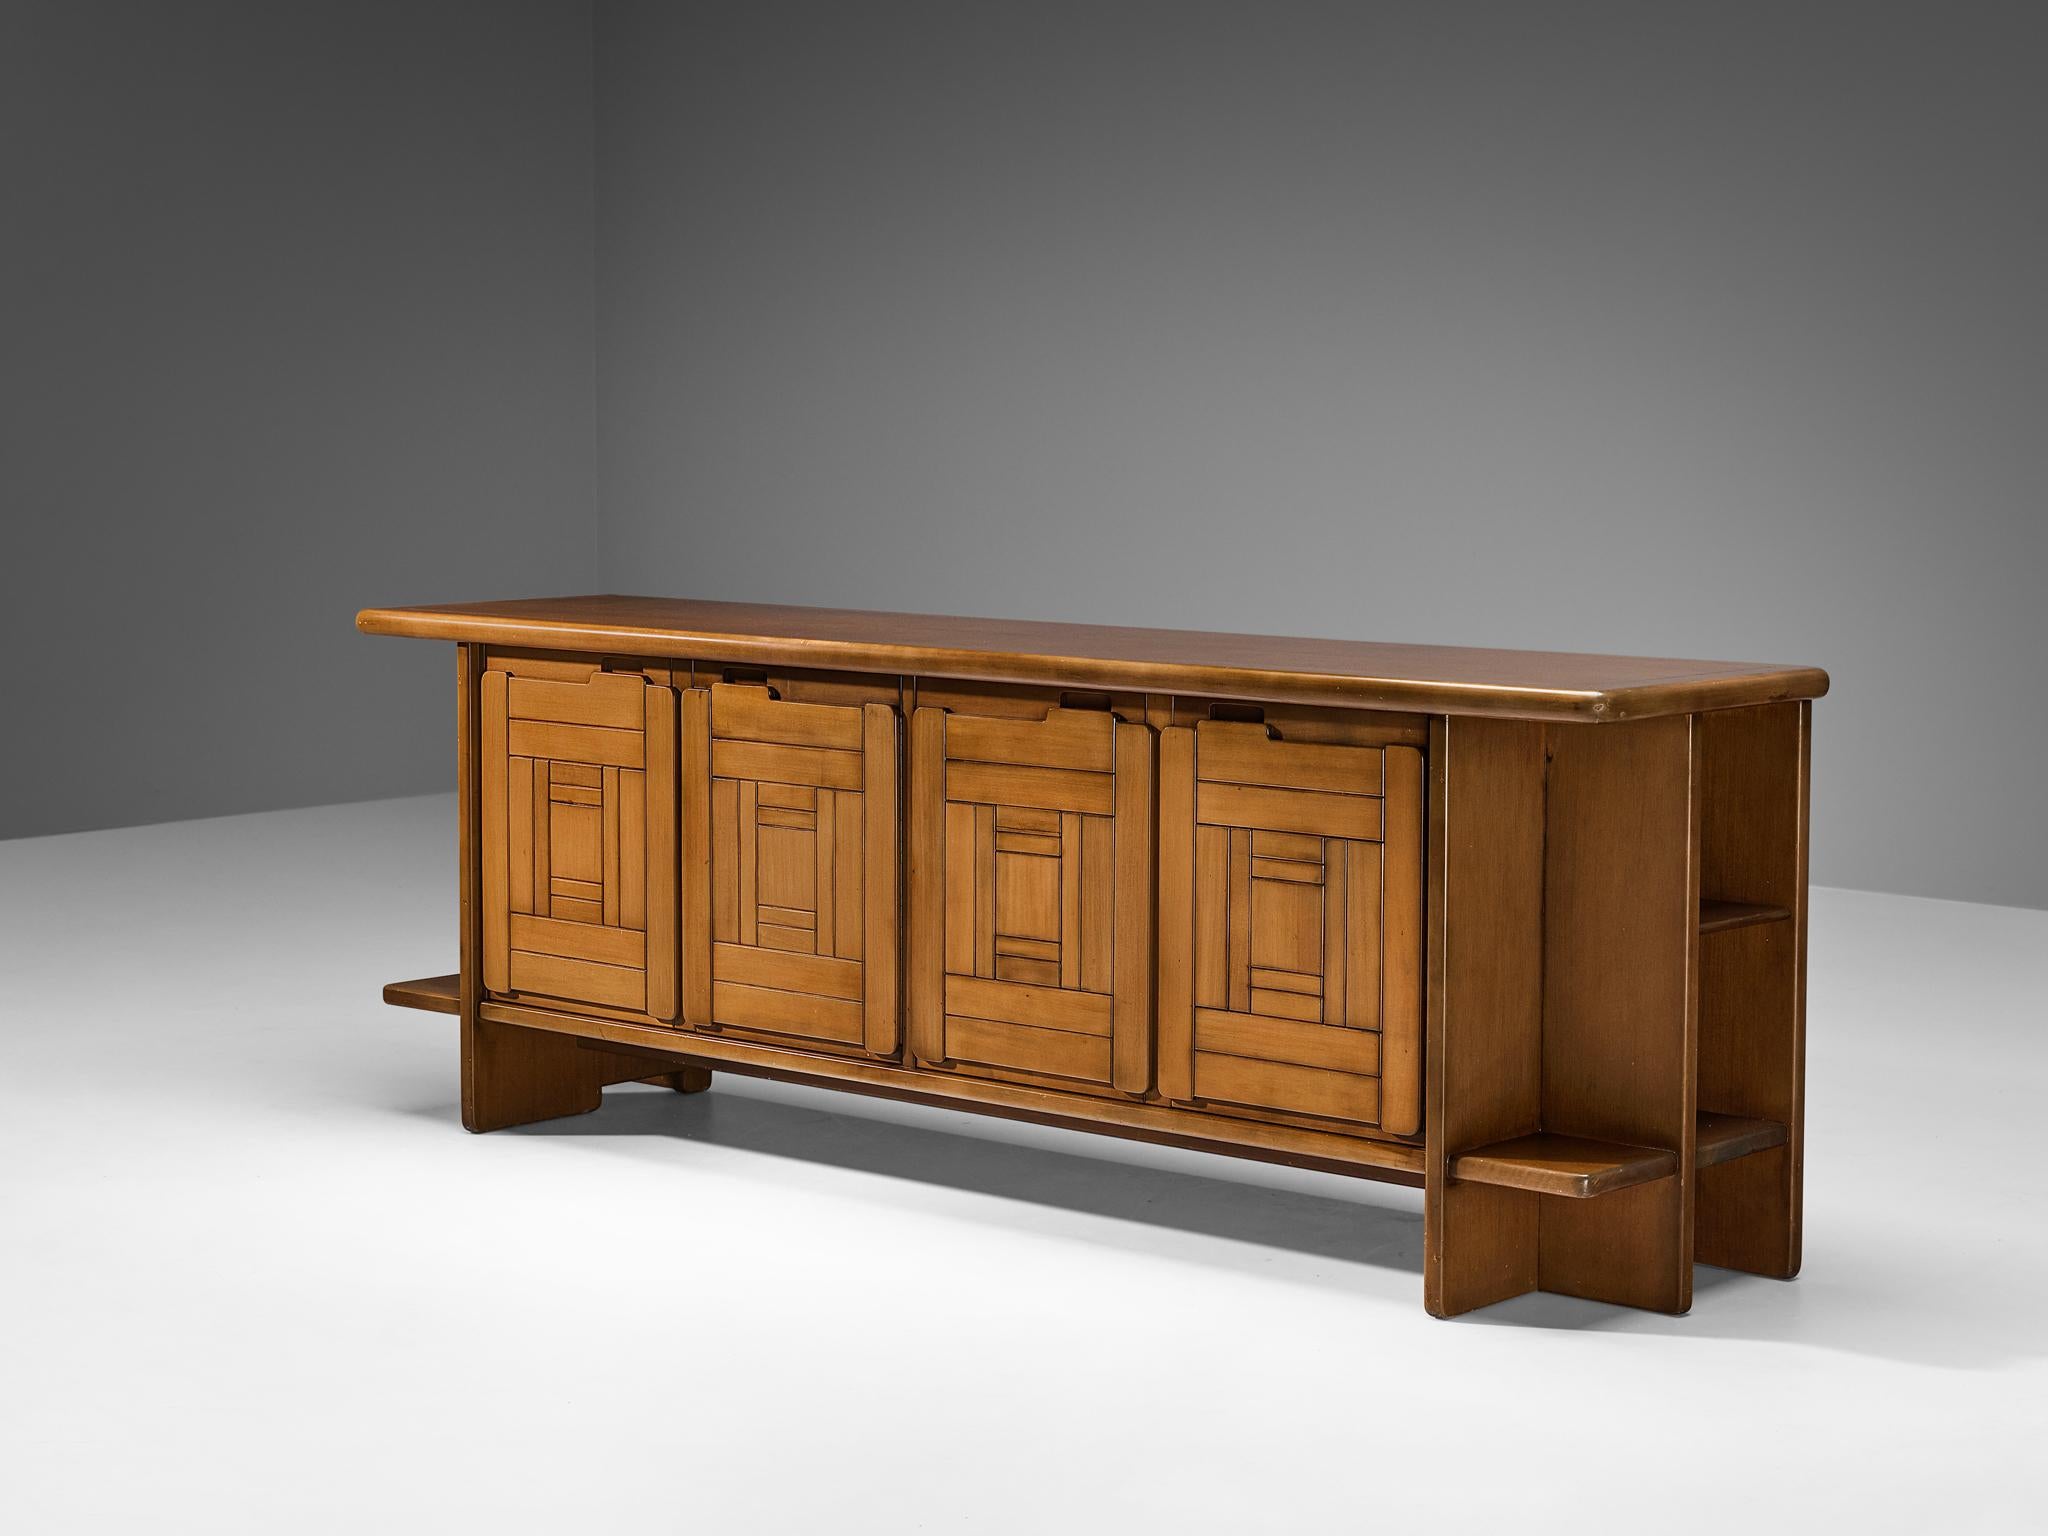 Sideboard, walnut, Italy, 1970s.

This sideboard is a good example of excellent woodworking by virtue of the graphical designed doors adding a wonderful rhythmic and haptic surface to the front. The design of the body which is executed in walnut